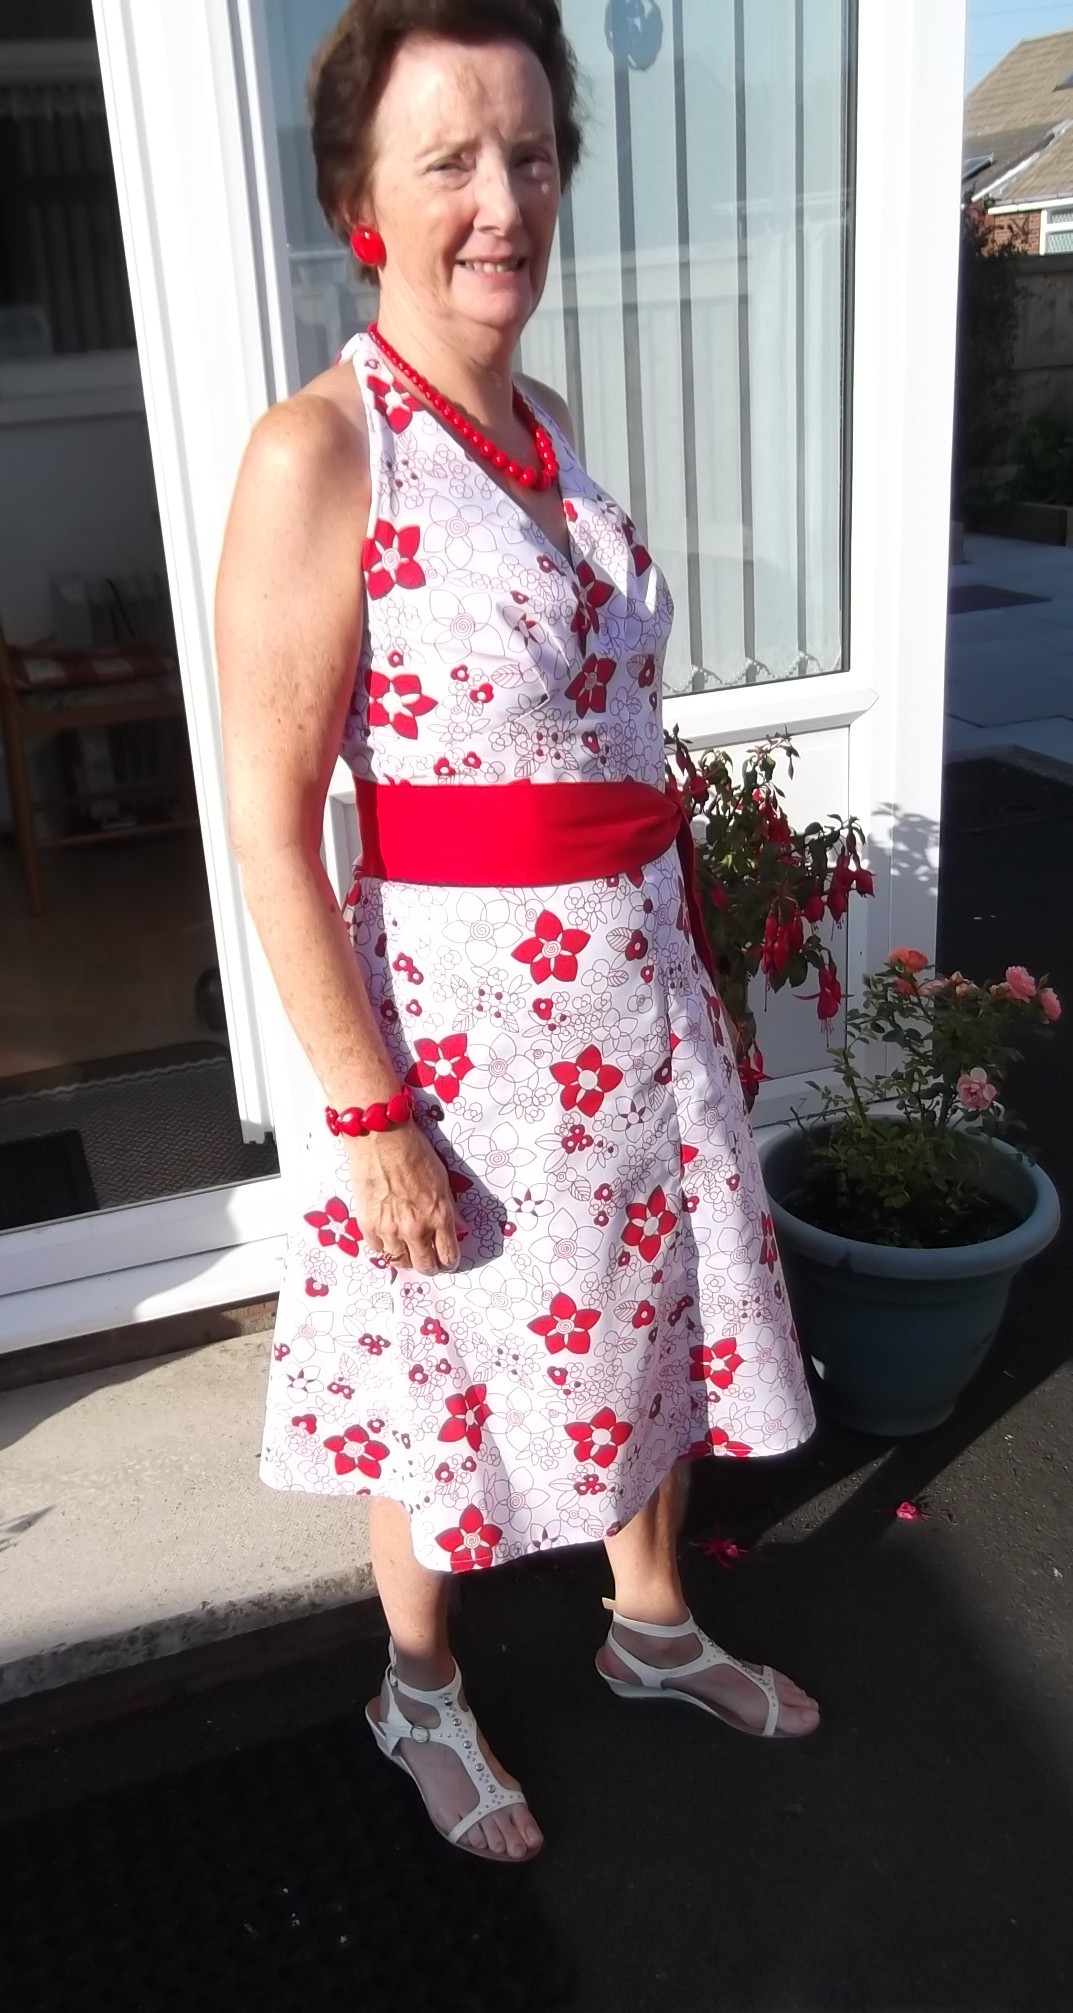 Halter neck sundress – Sewing Projects | BurdaStyle.com